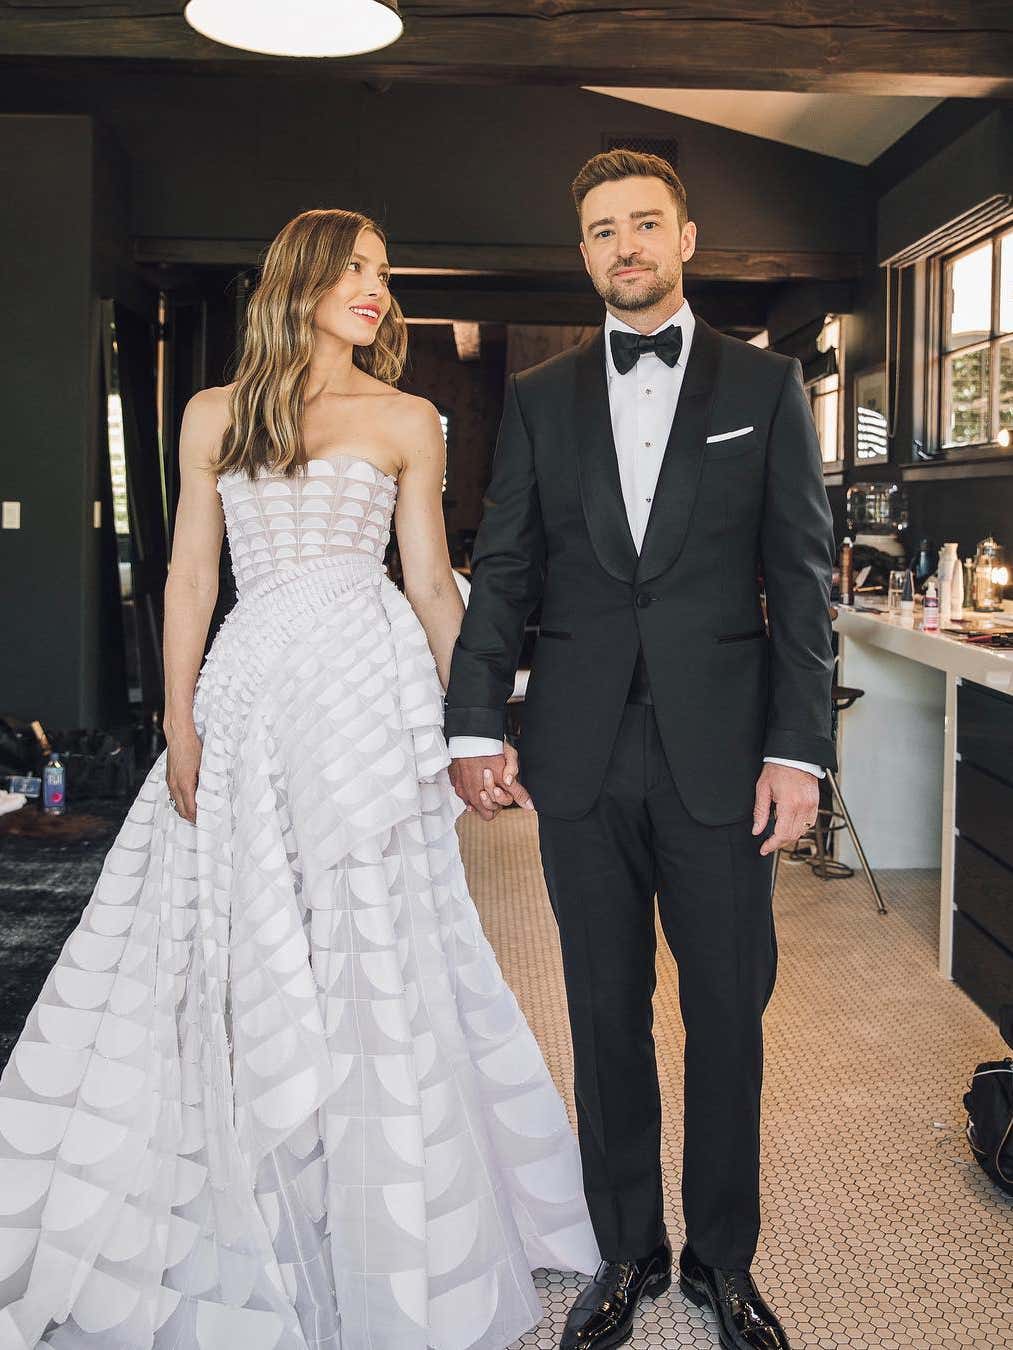 Justin Timberlake and Jessica Biel Just Sold Their $8 Million NYC Penthouse—Look Inside